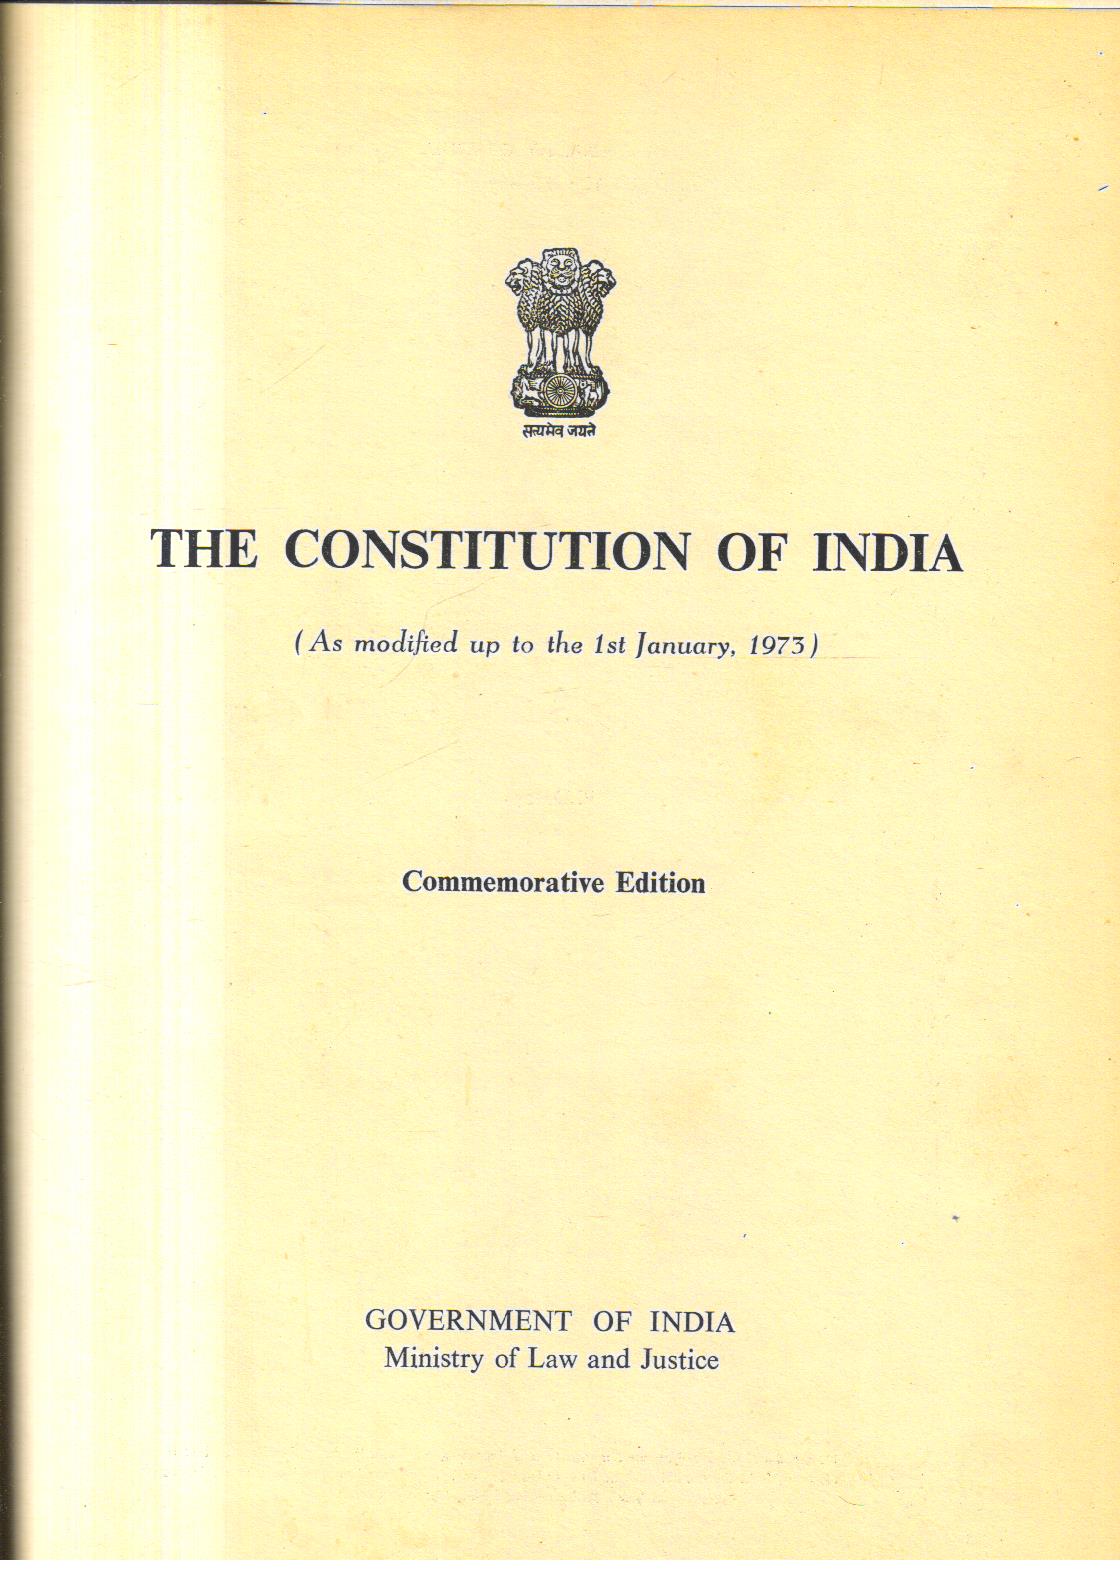 The Constitution of India (as modified up to the 1st January, 1973)